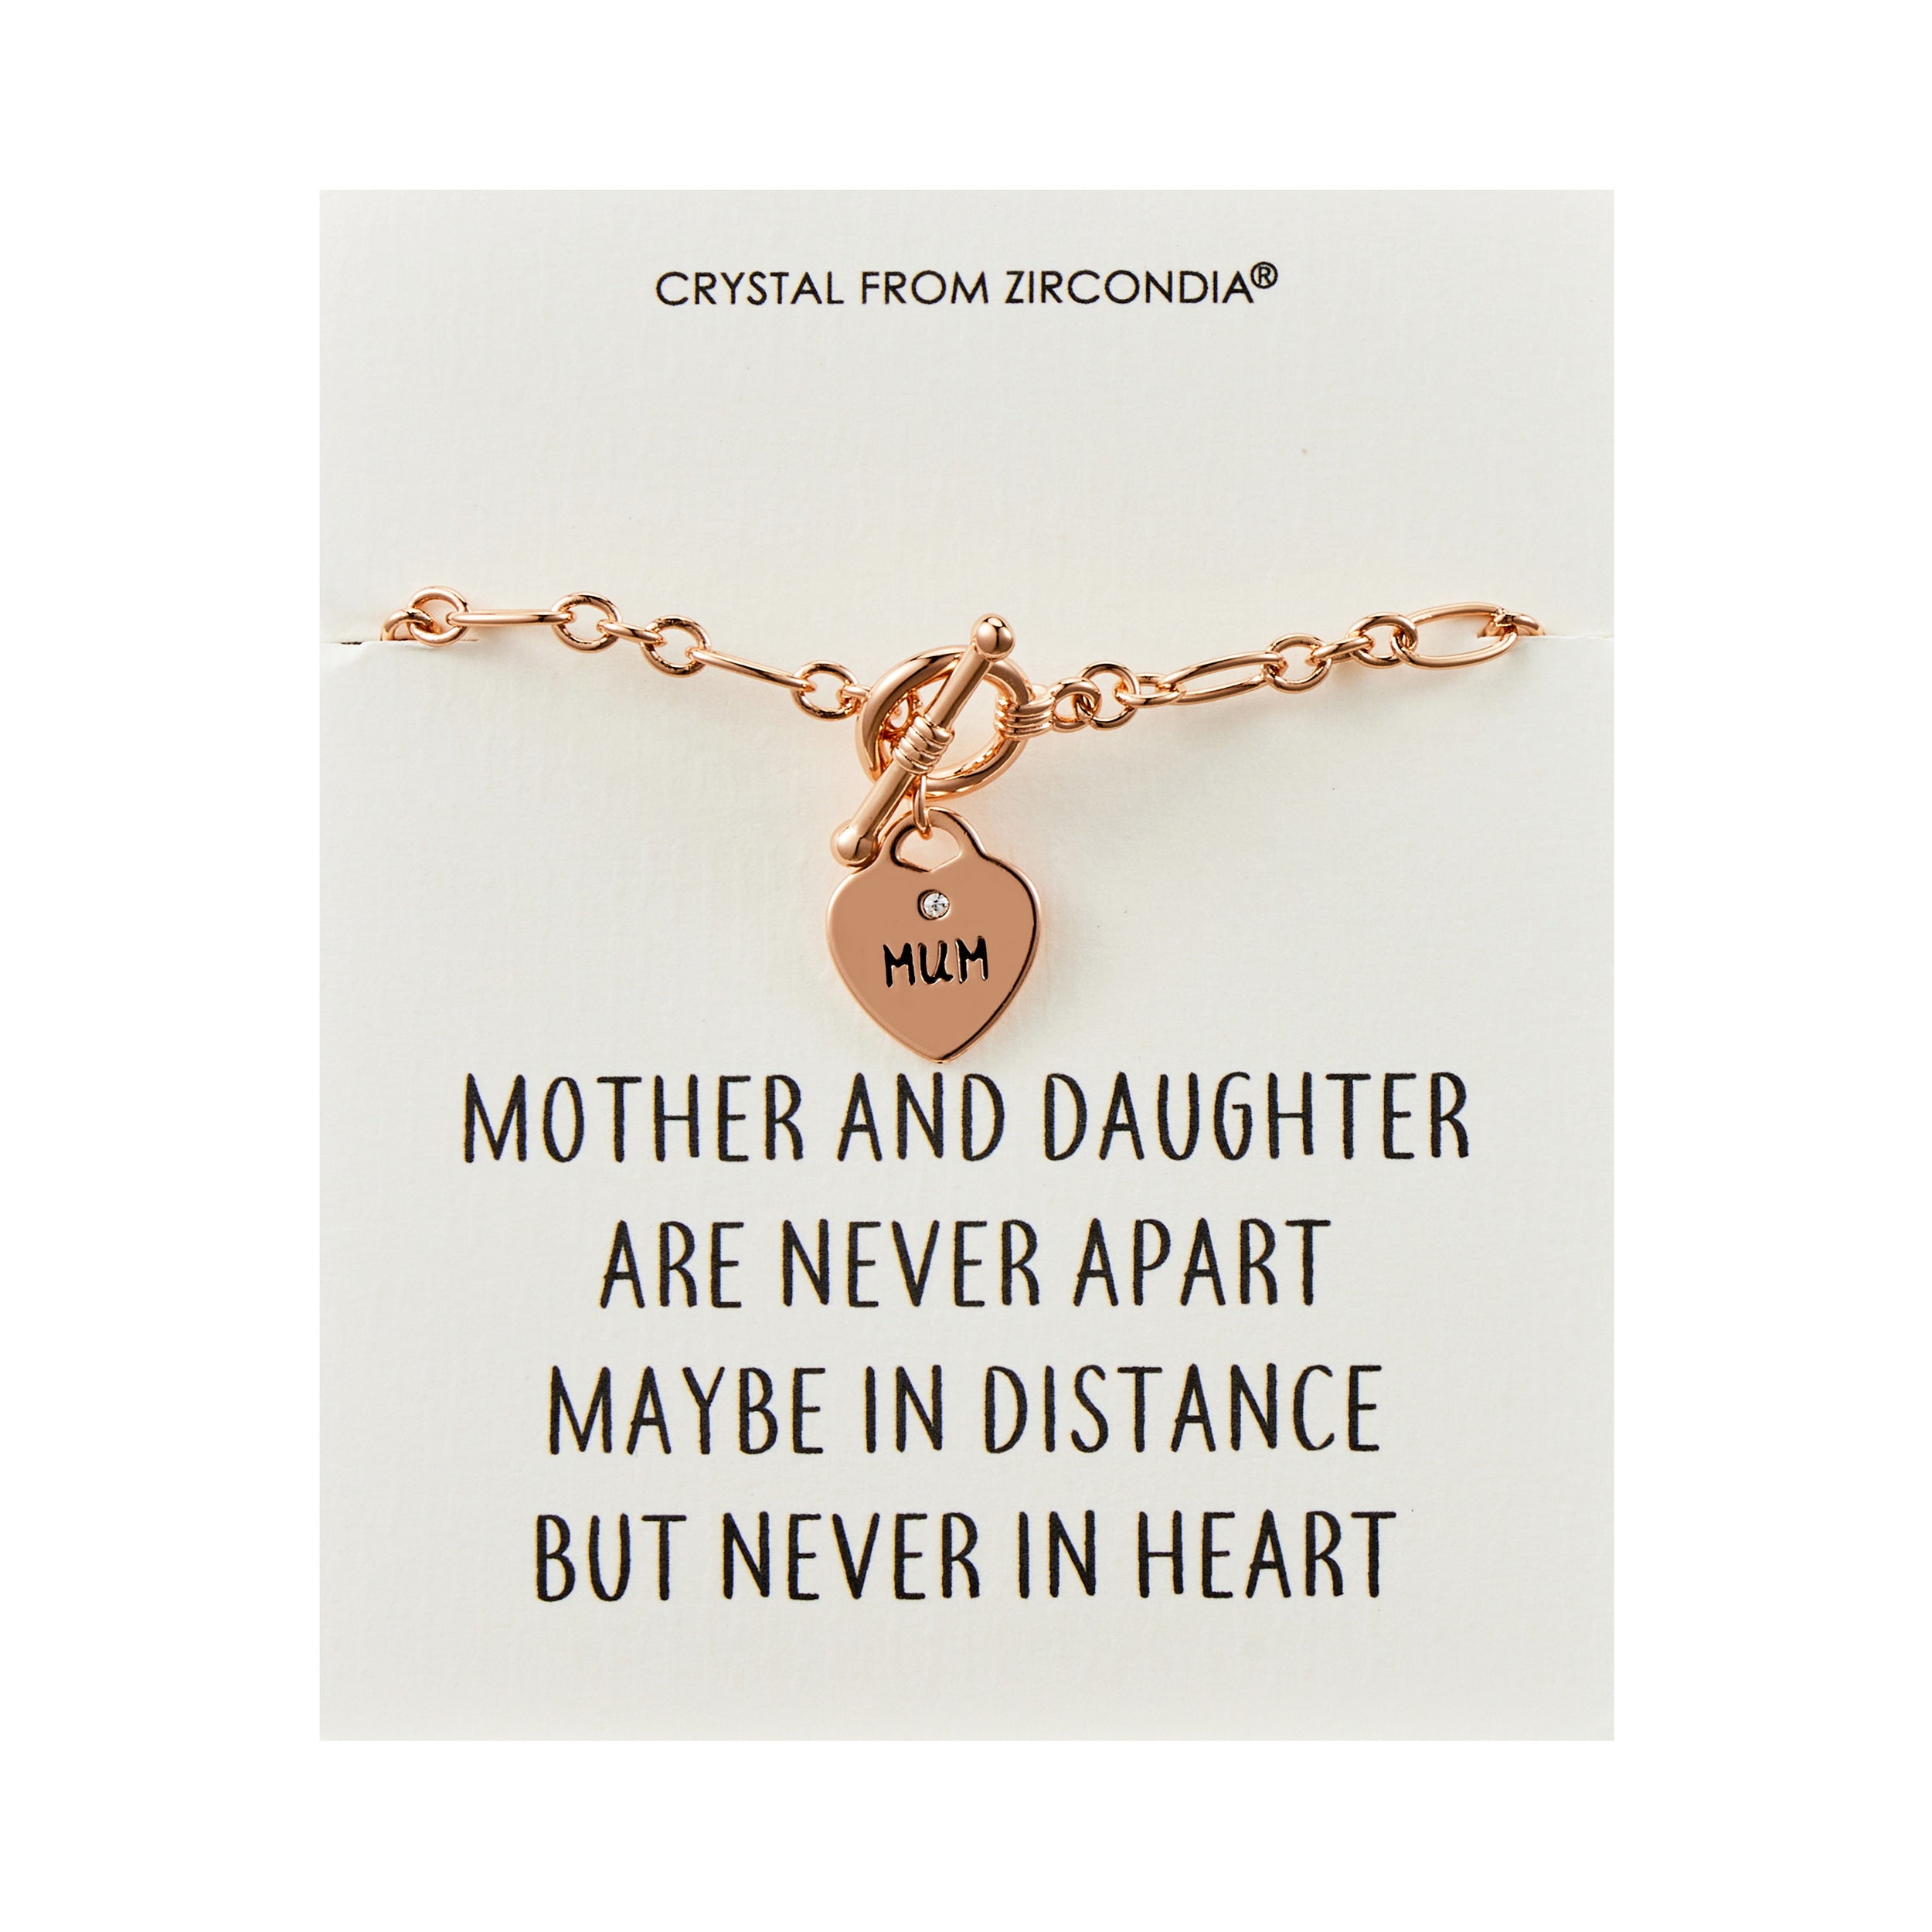 Rose Gold Plated Mum and Daughter Quote Charm Bracelet Created with Zircondia® Crystals